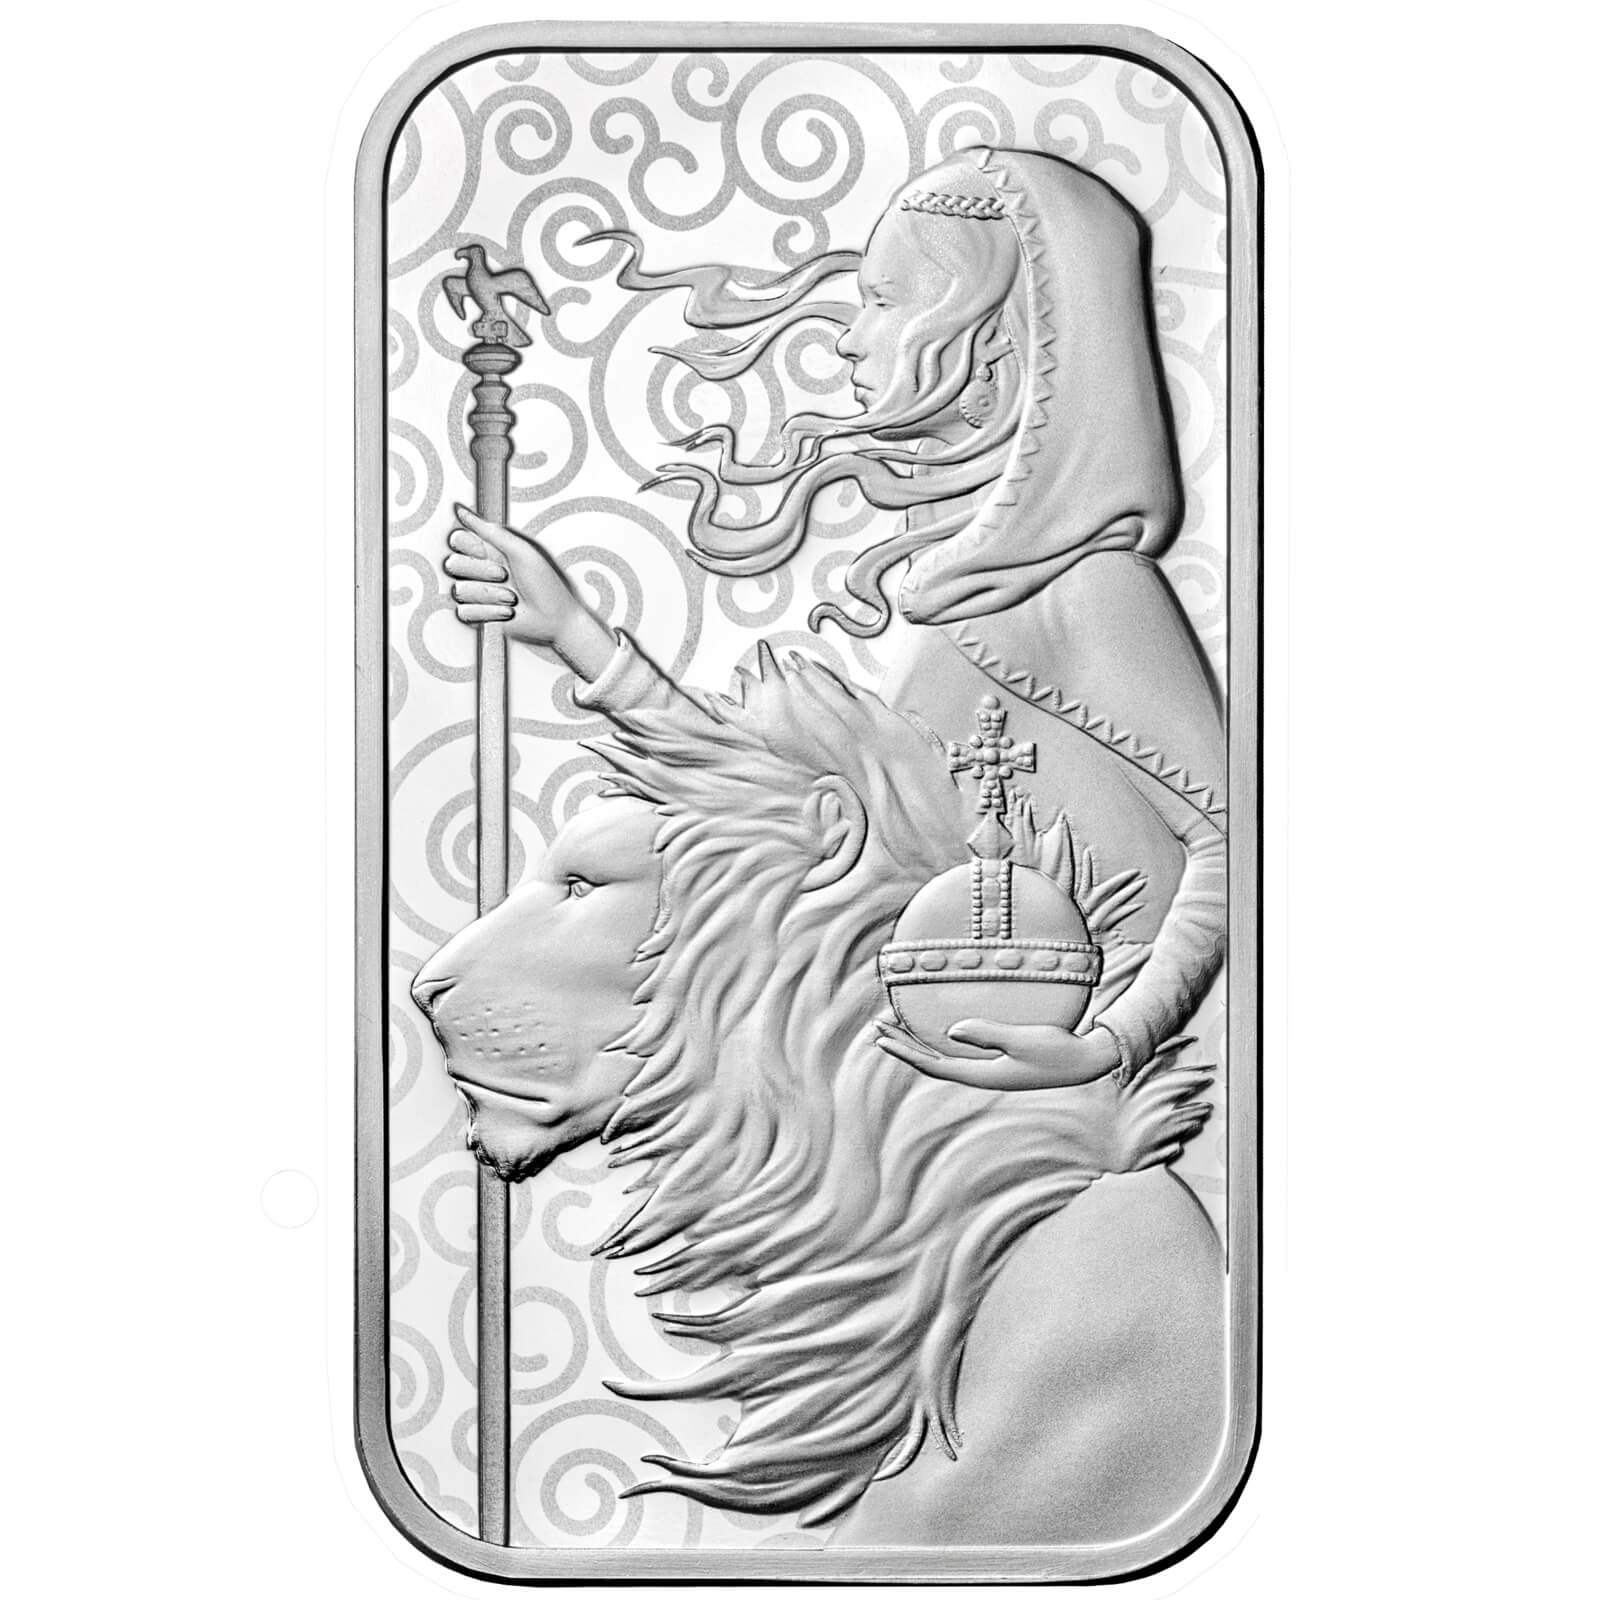 *Gold/Platinum Group Premium Members* 2021 Una and the Lion 1oz Silver Bar